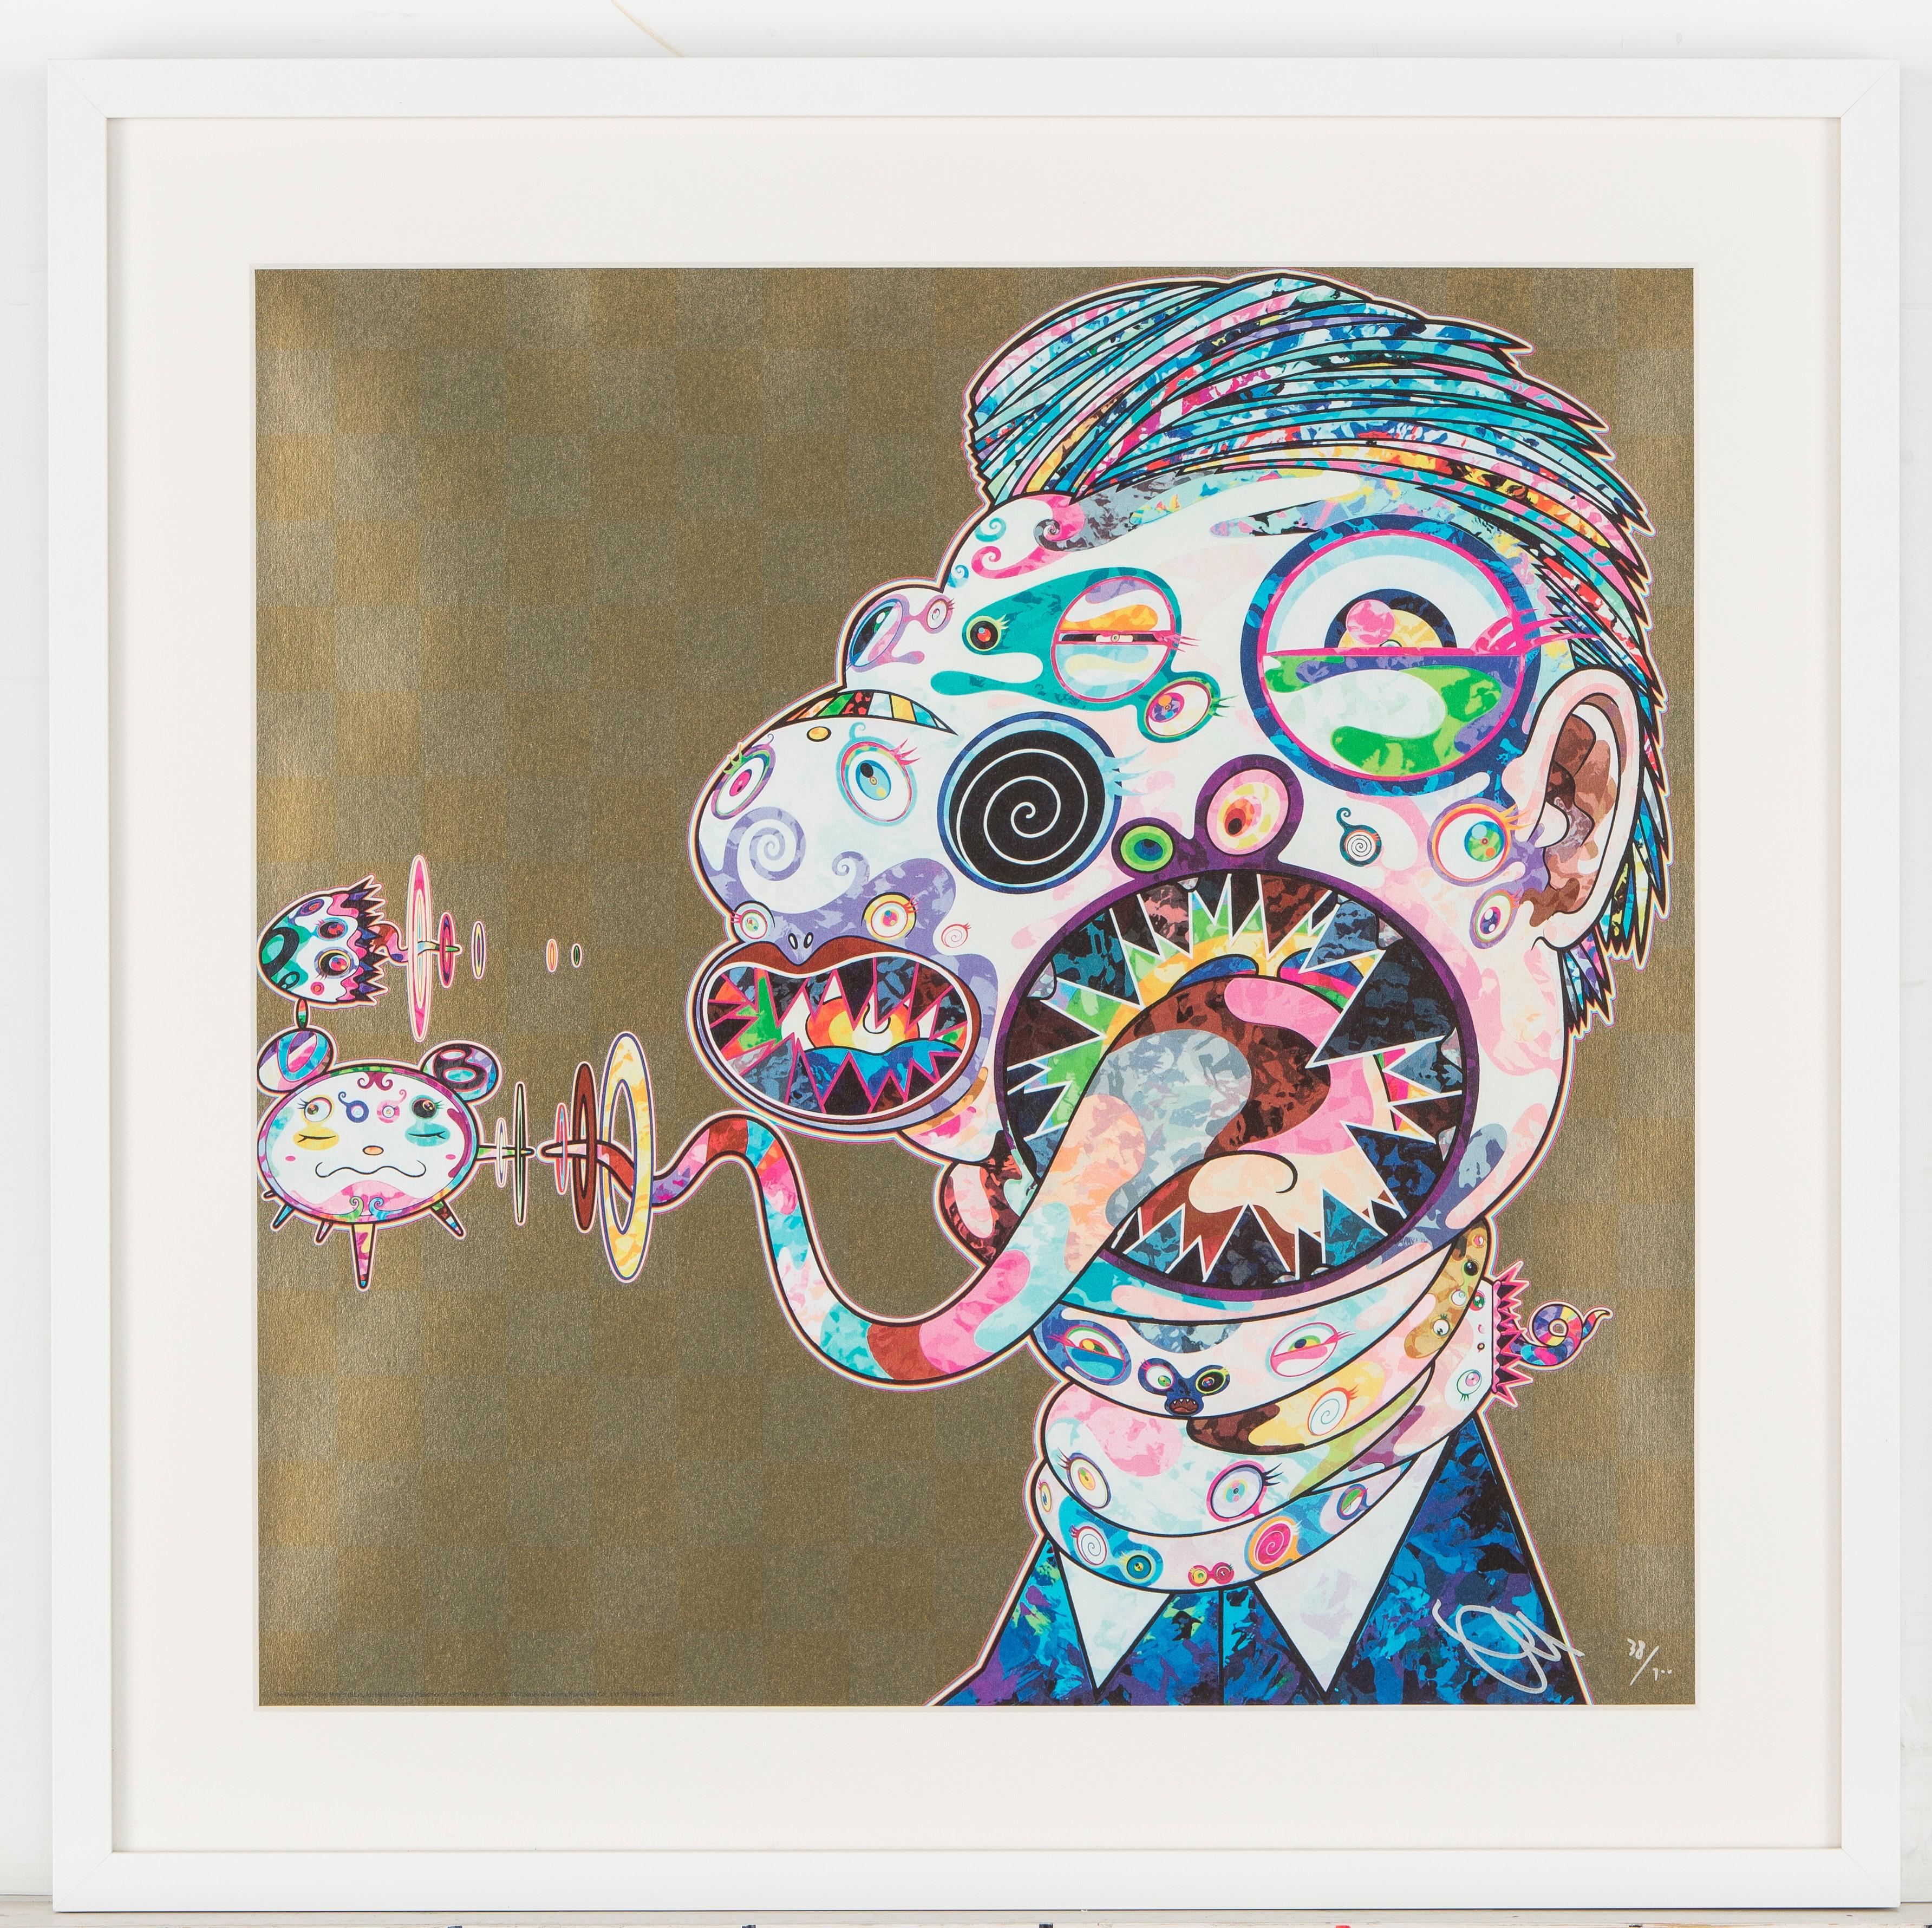 Homage to Francis Bacon (Study for Head of George Dyer). Print by Murakami - Beige Portrait Print by Takashi Murakami